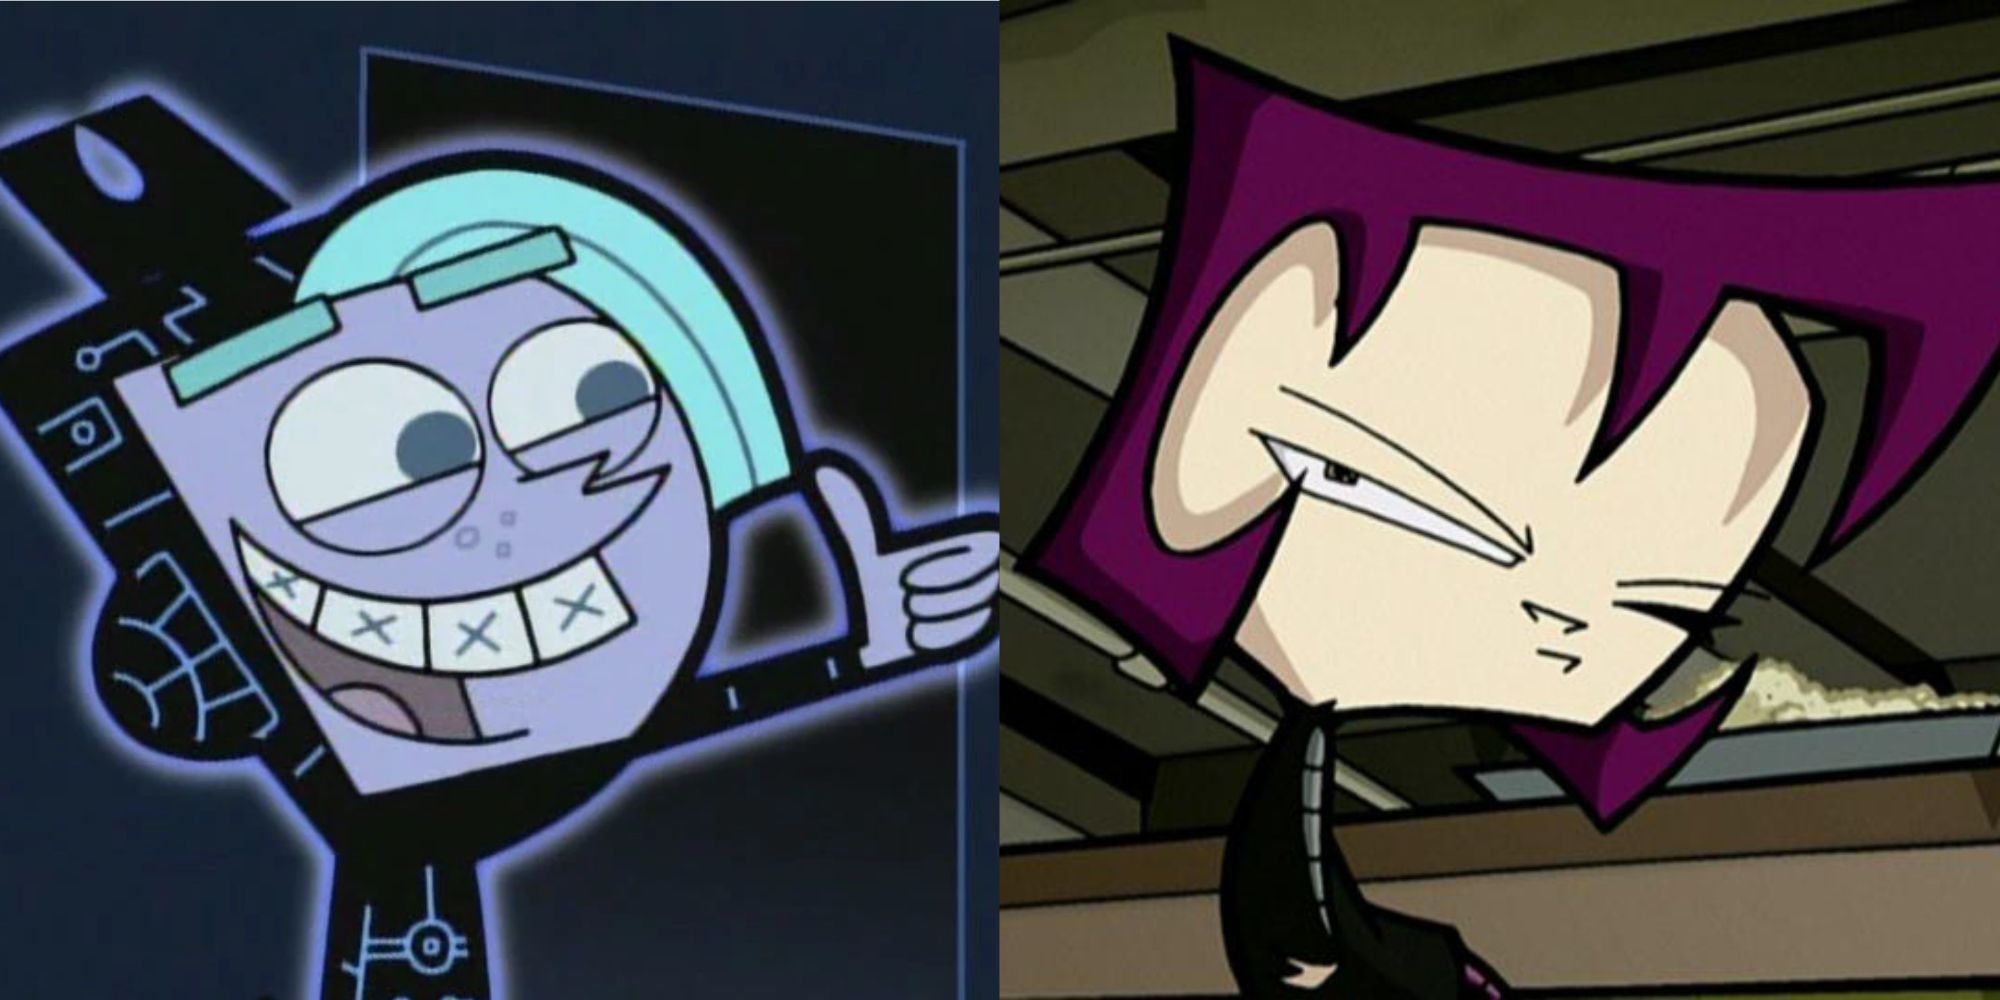 Chester McBadbat and Gaz Membrane from the Nickelodeon shows The Fairly OddParents and Invader Zim.